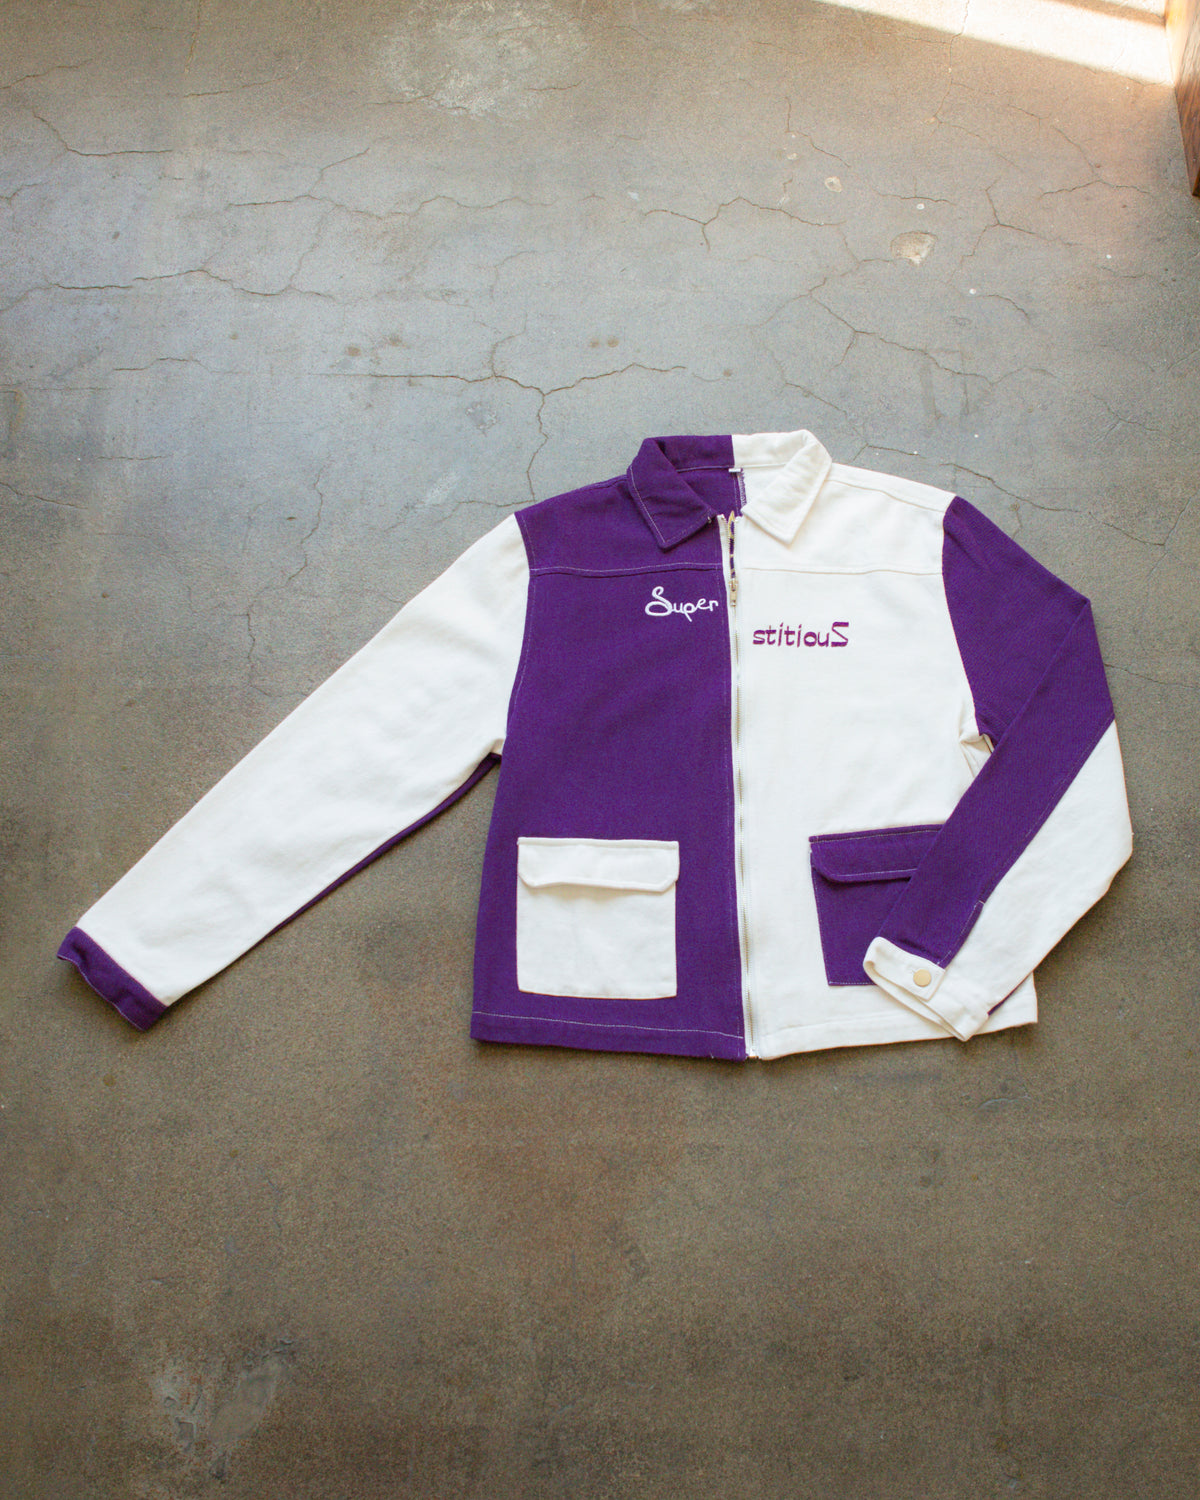 SUPERSTiTiOUS PURPLE x WHITE DUO-TONE FITTED JACKET